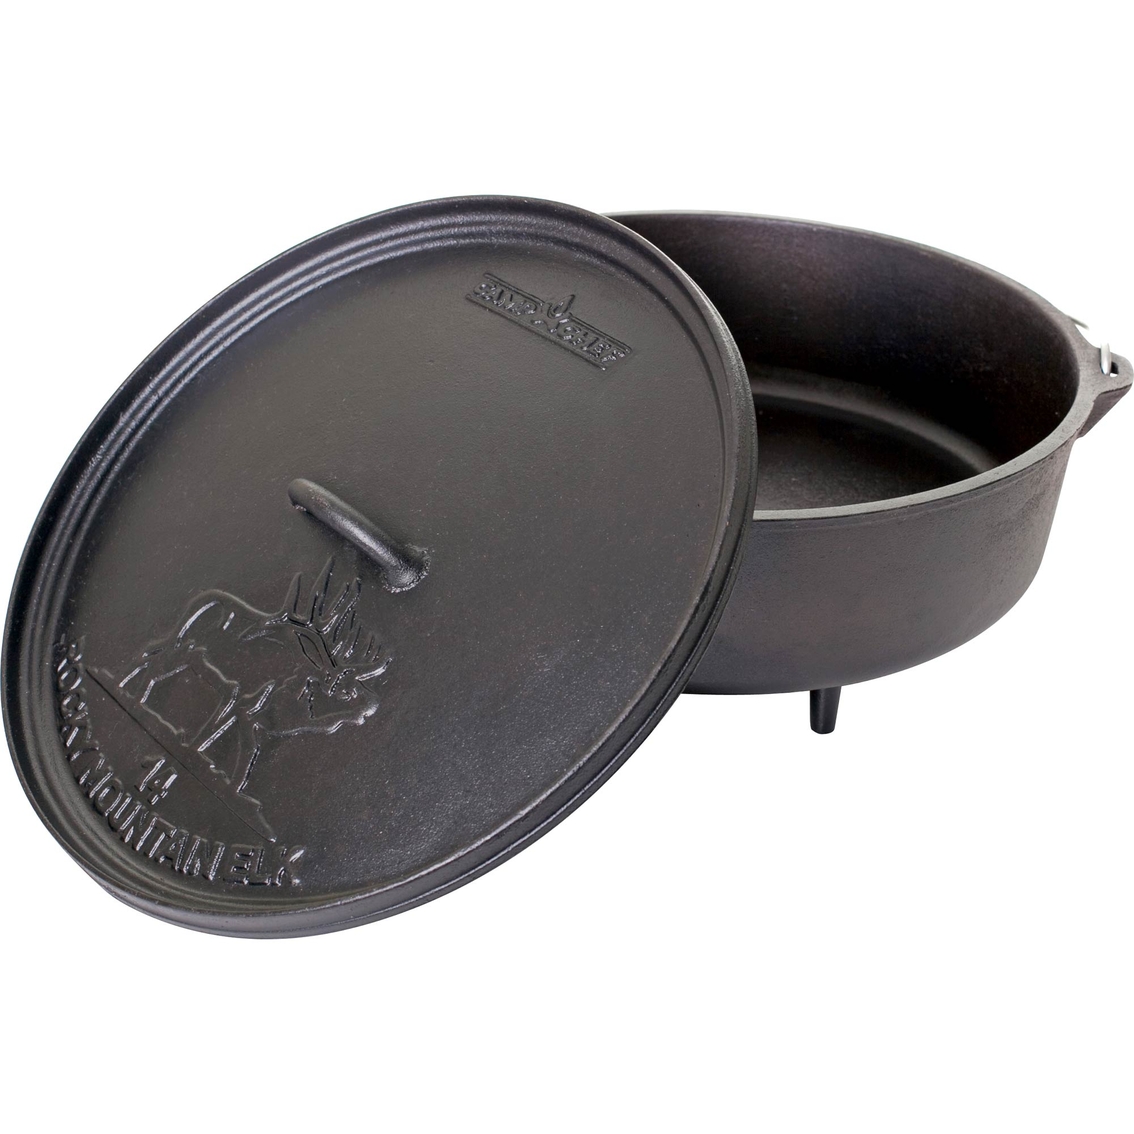 Camp Chef 14 in. Cast Iron Classic Dutch Oven - Image 2 of 4